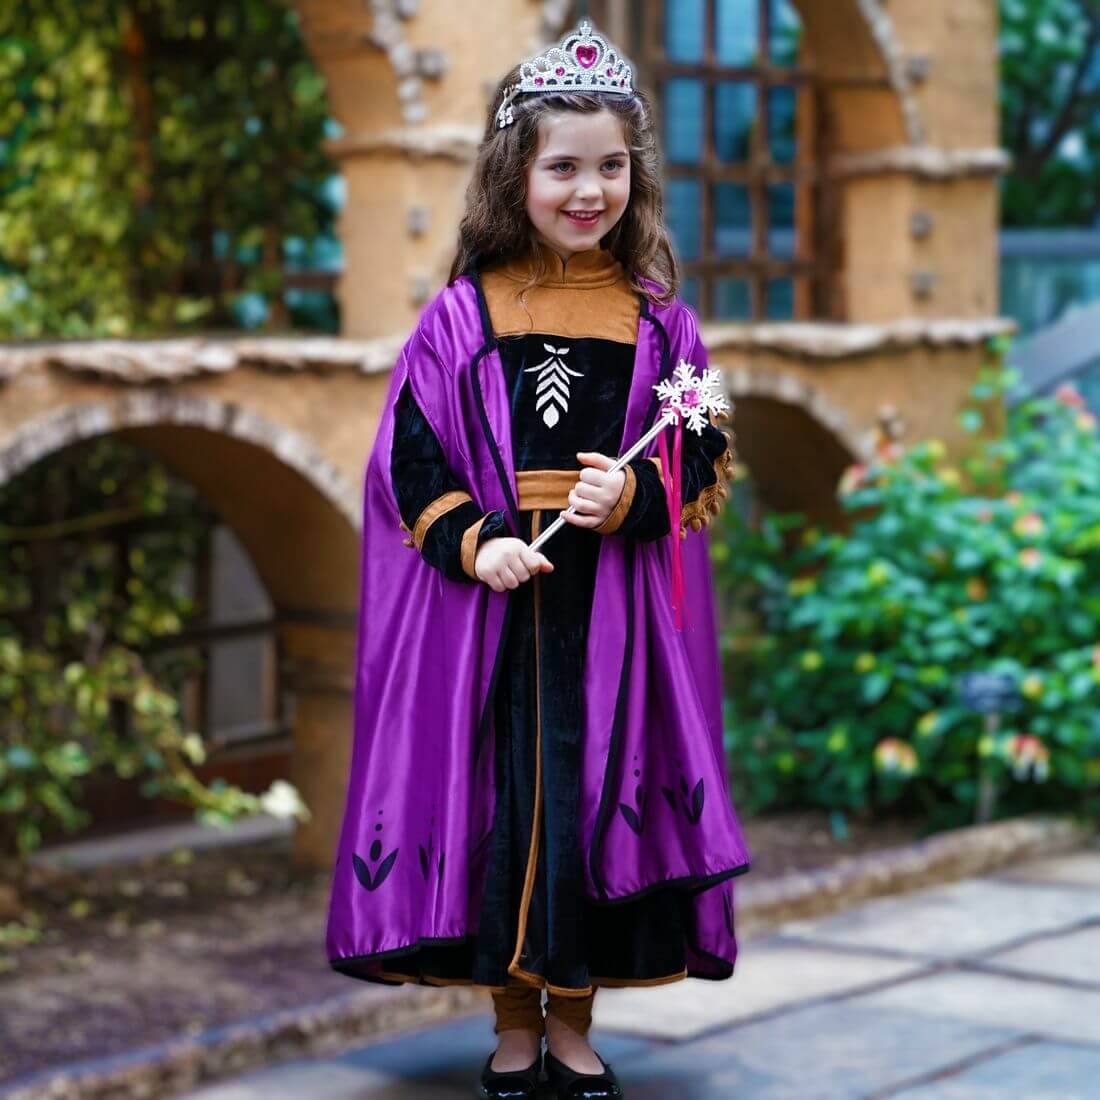 Little girl in a princess costume with a purple cape